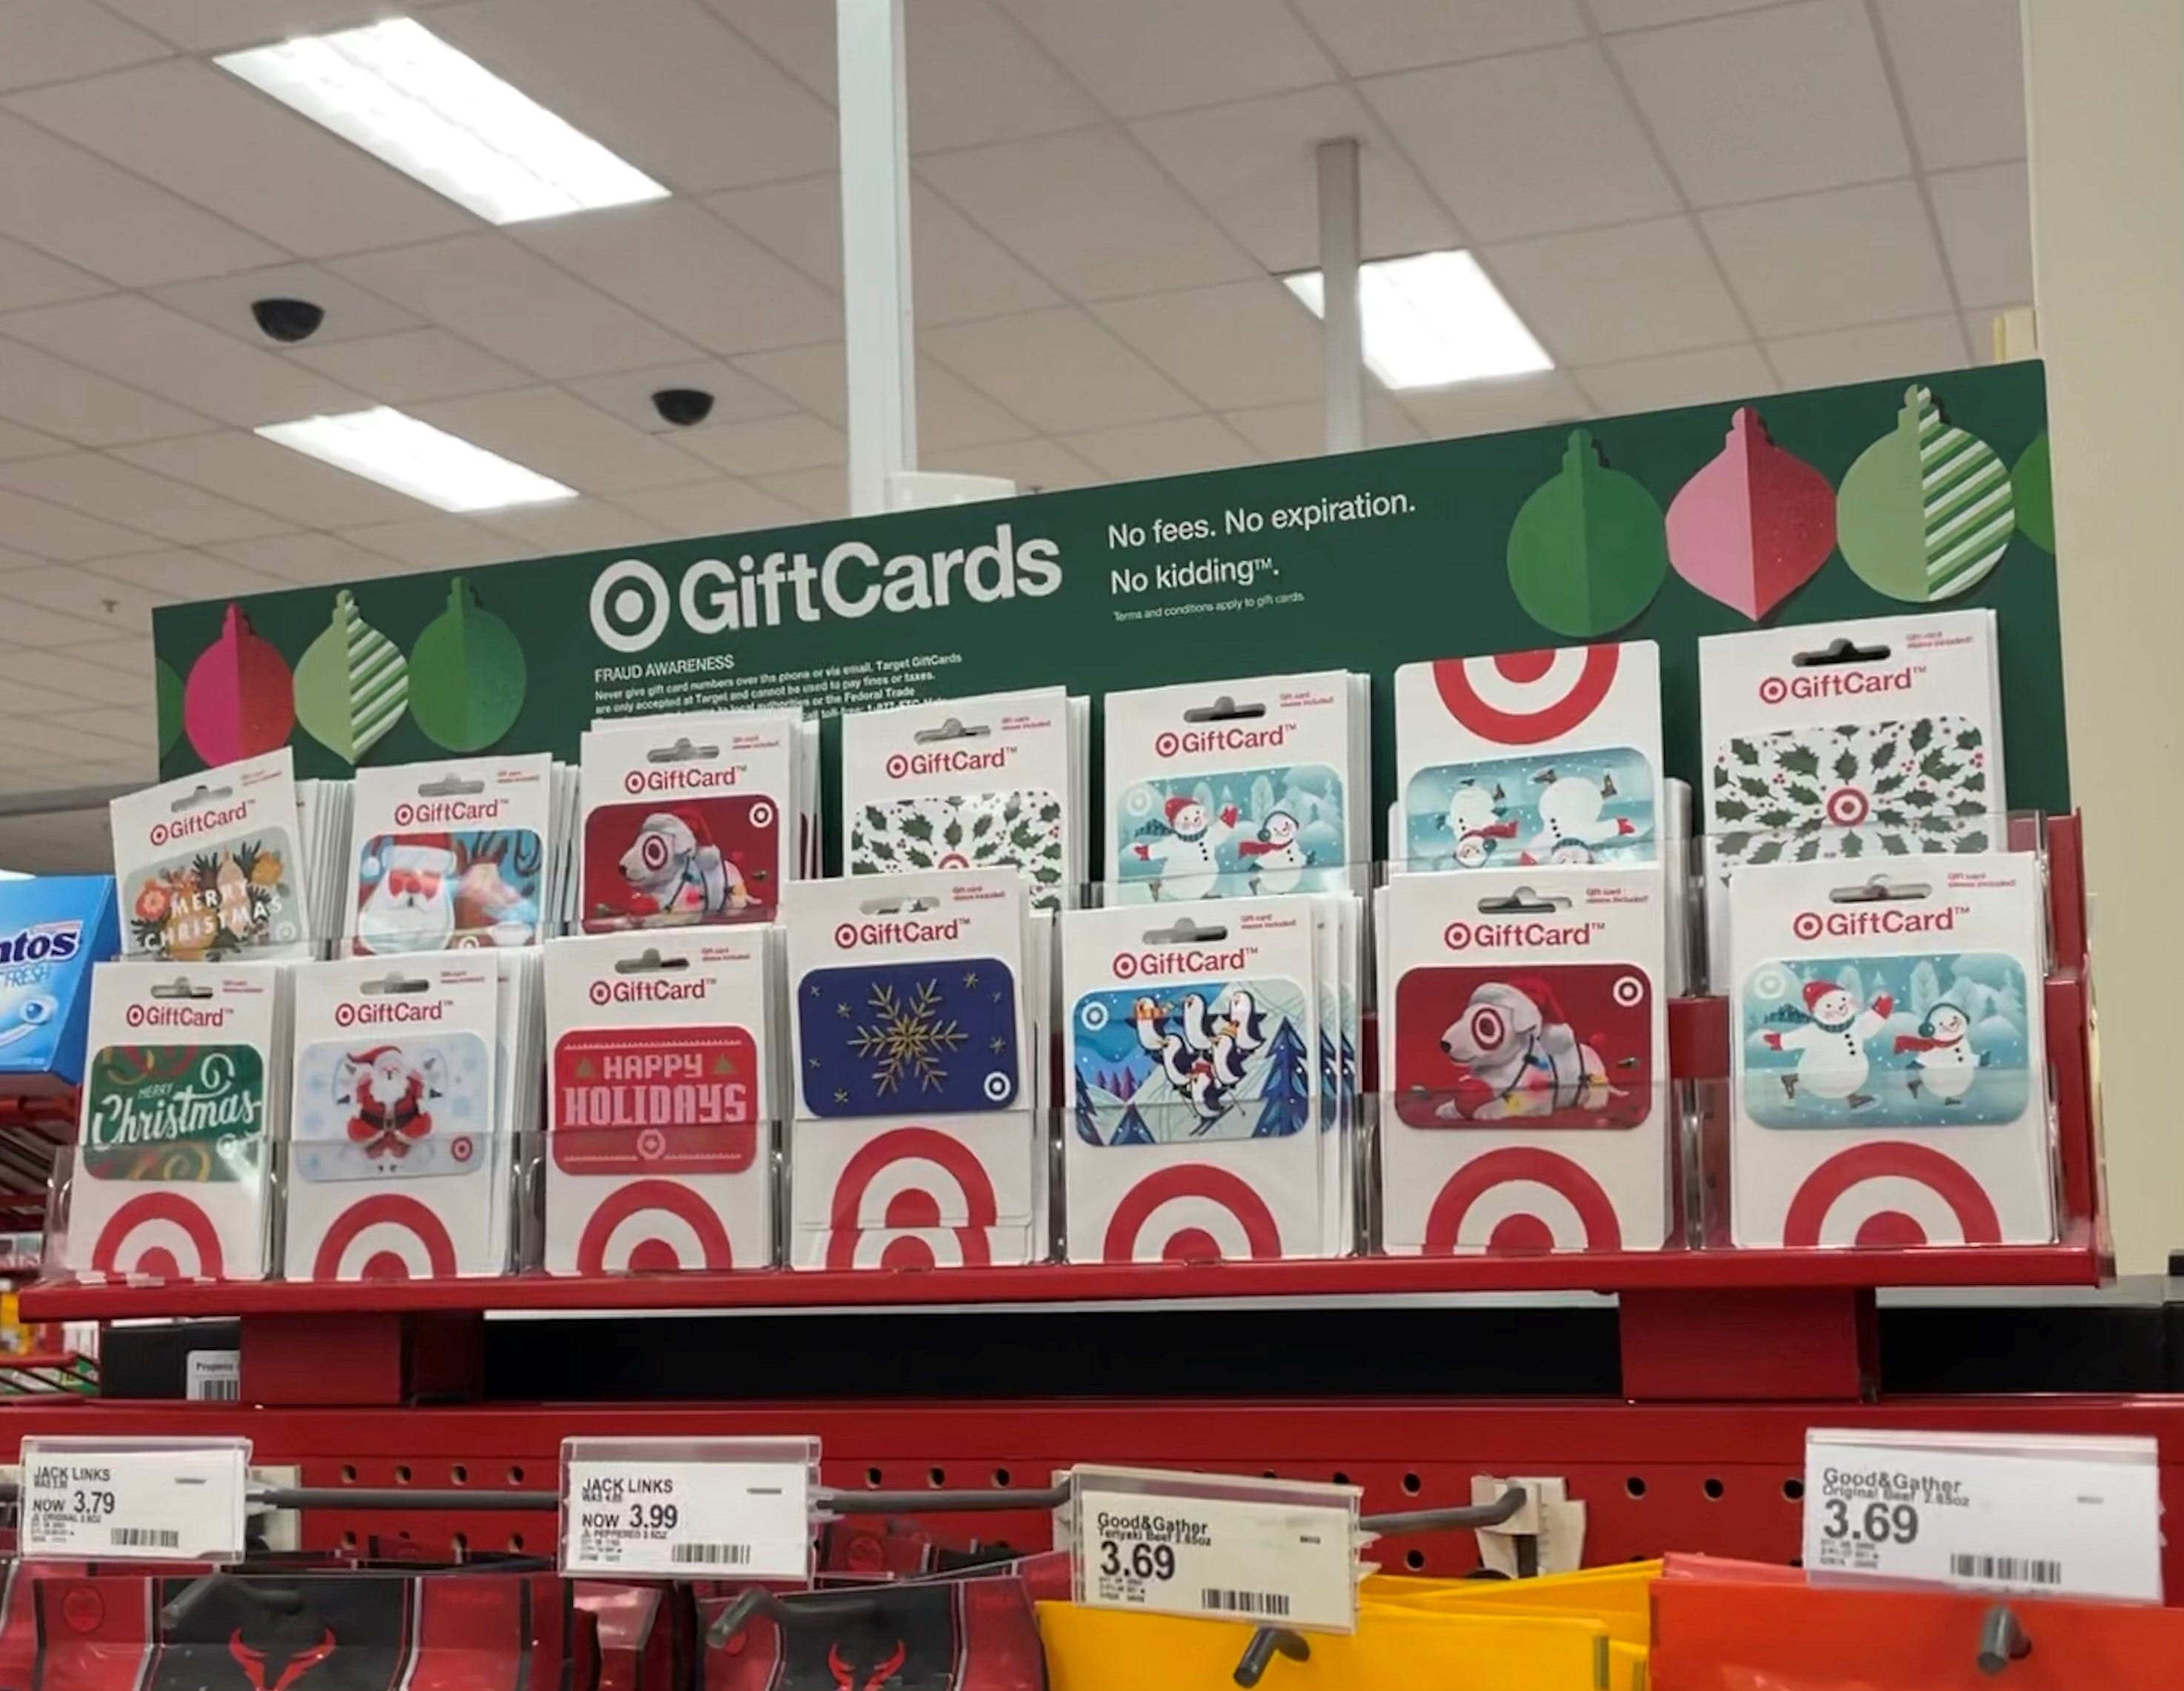 Target Gift Card Discount 2020 Save 10 Percent On Gift Cards Dec 5 6 - target promo codes for gift cards roblox